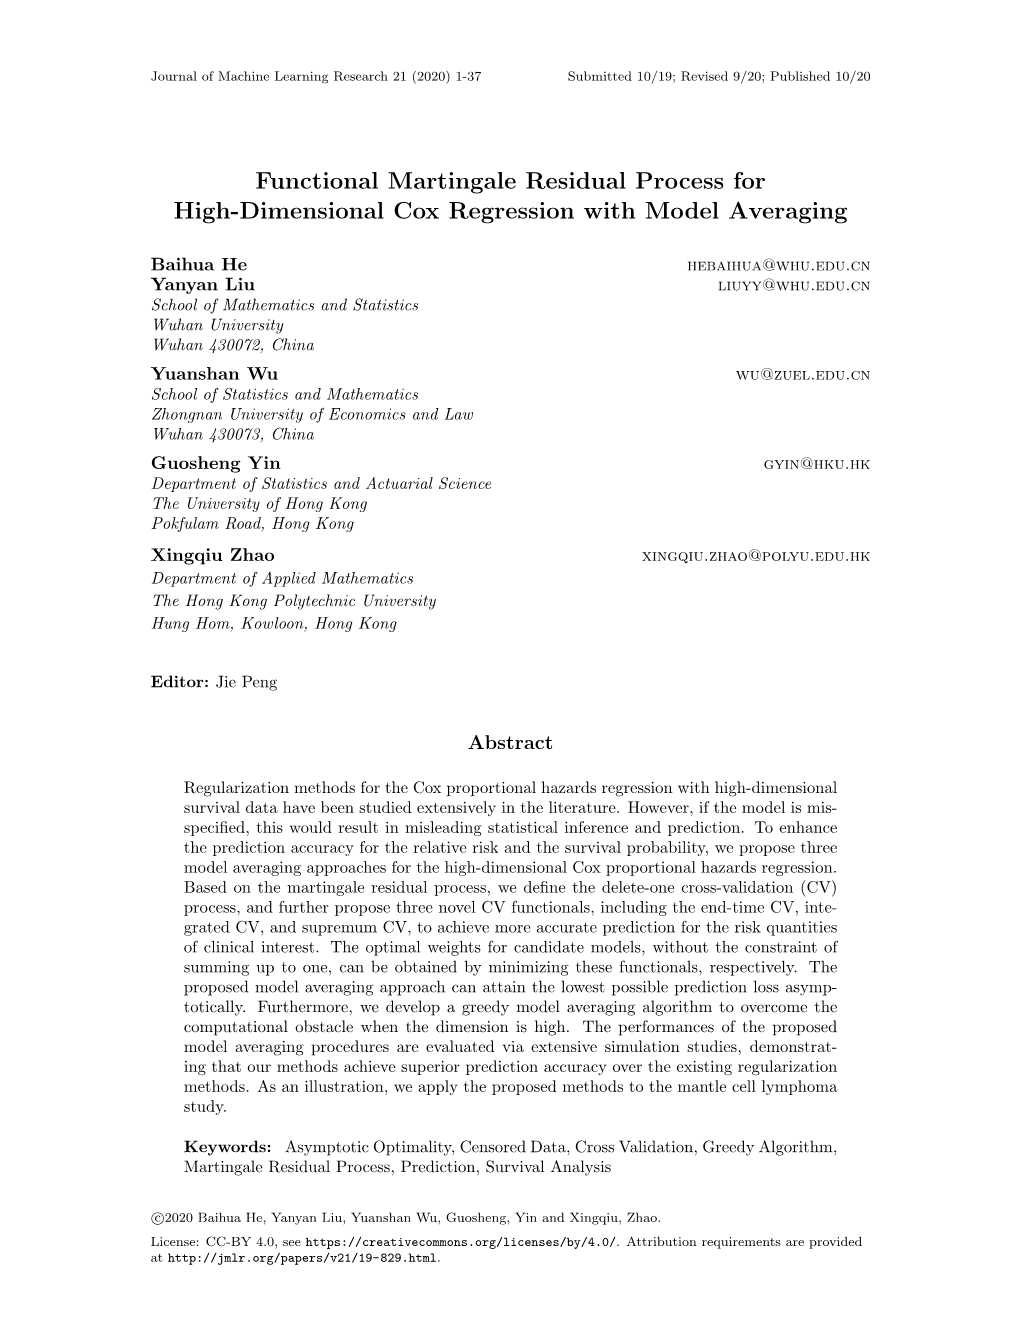 Functional Martingale Residual Process for High-Dimensional Cox Regression with Model Averaging